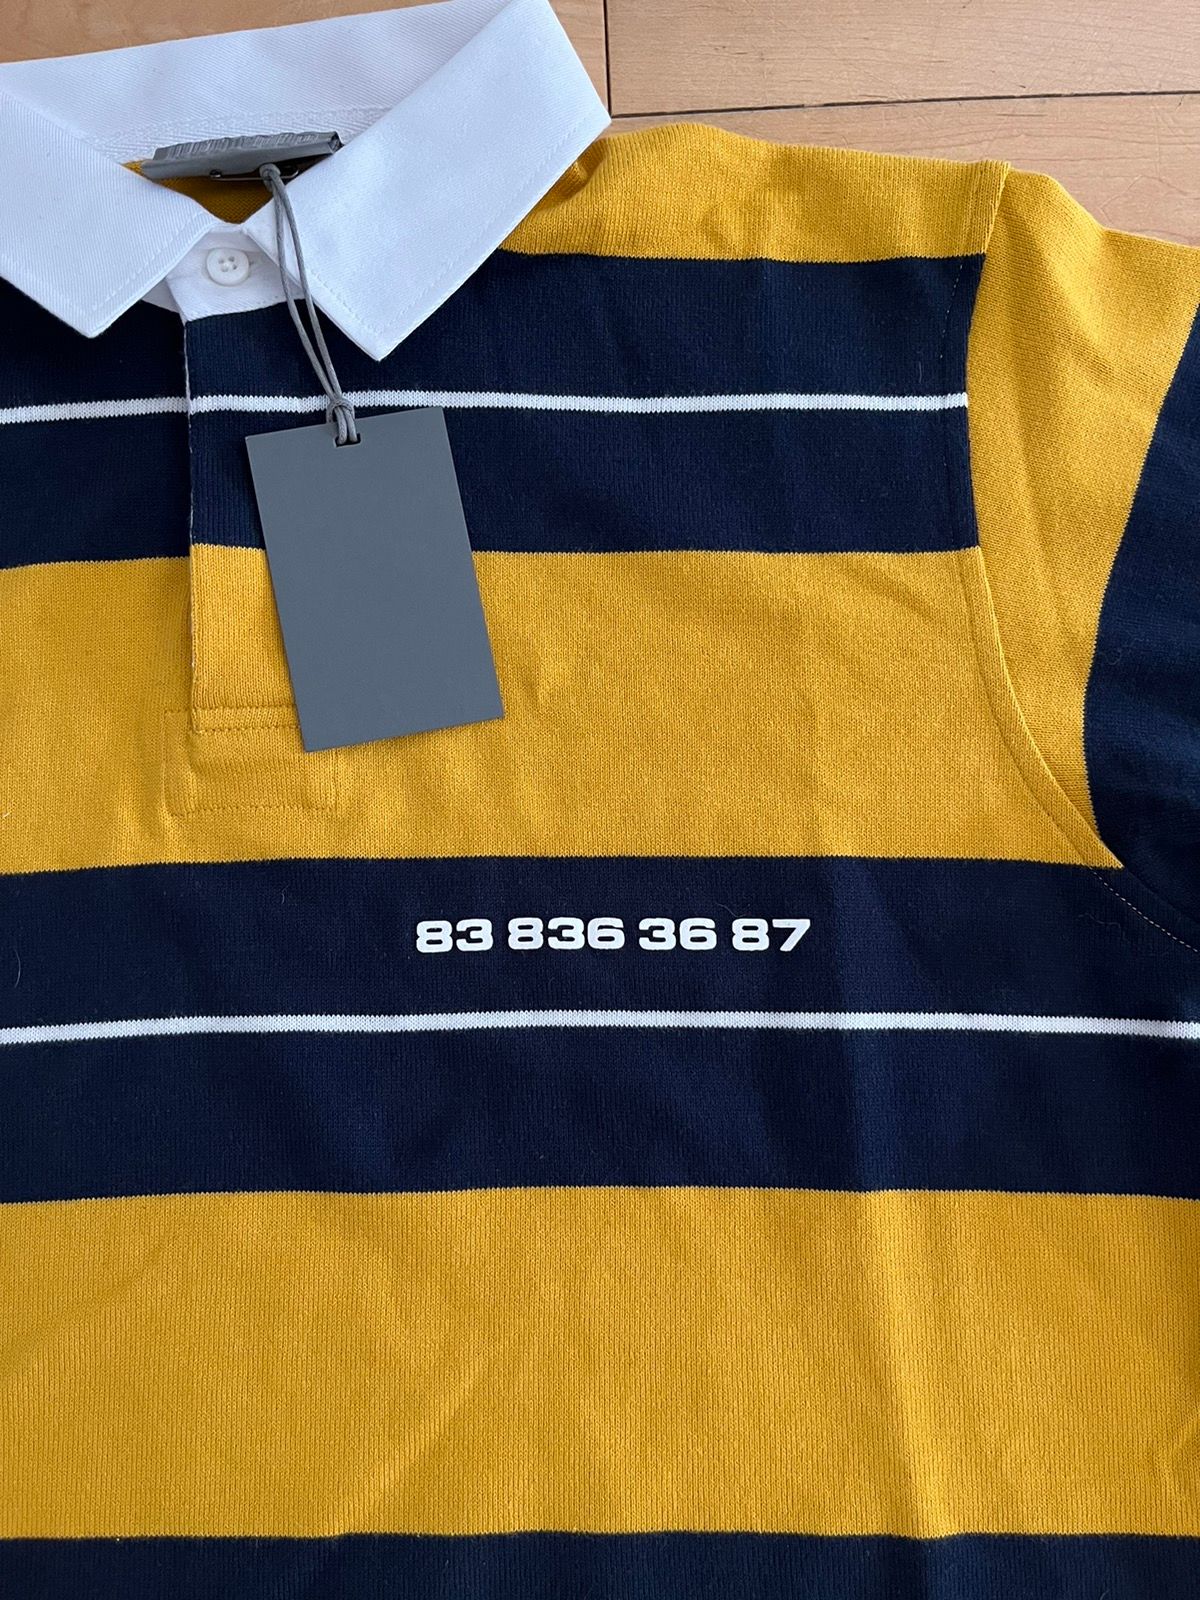 NWT - VTMNTS Striped Number Polo - 4